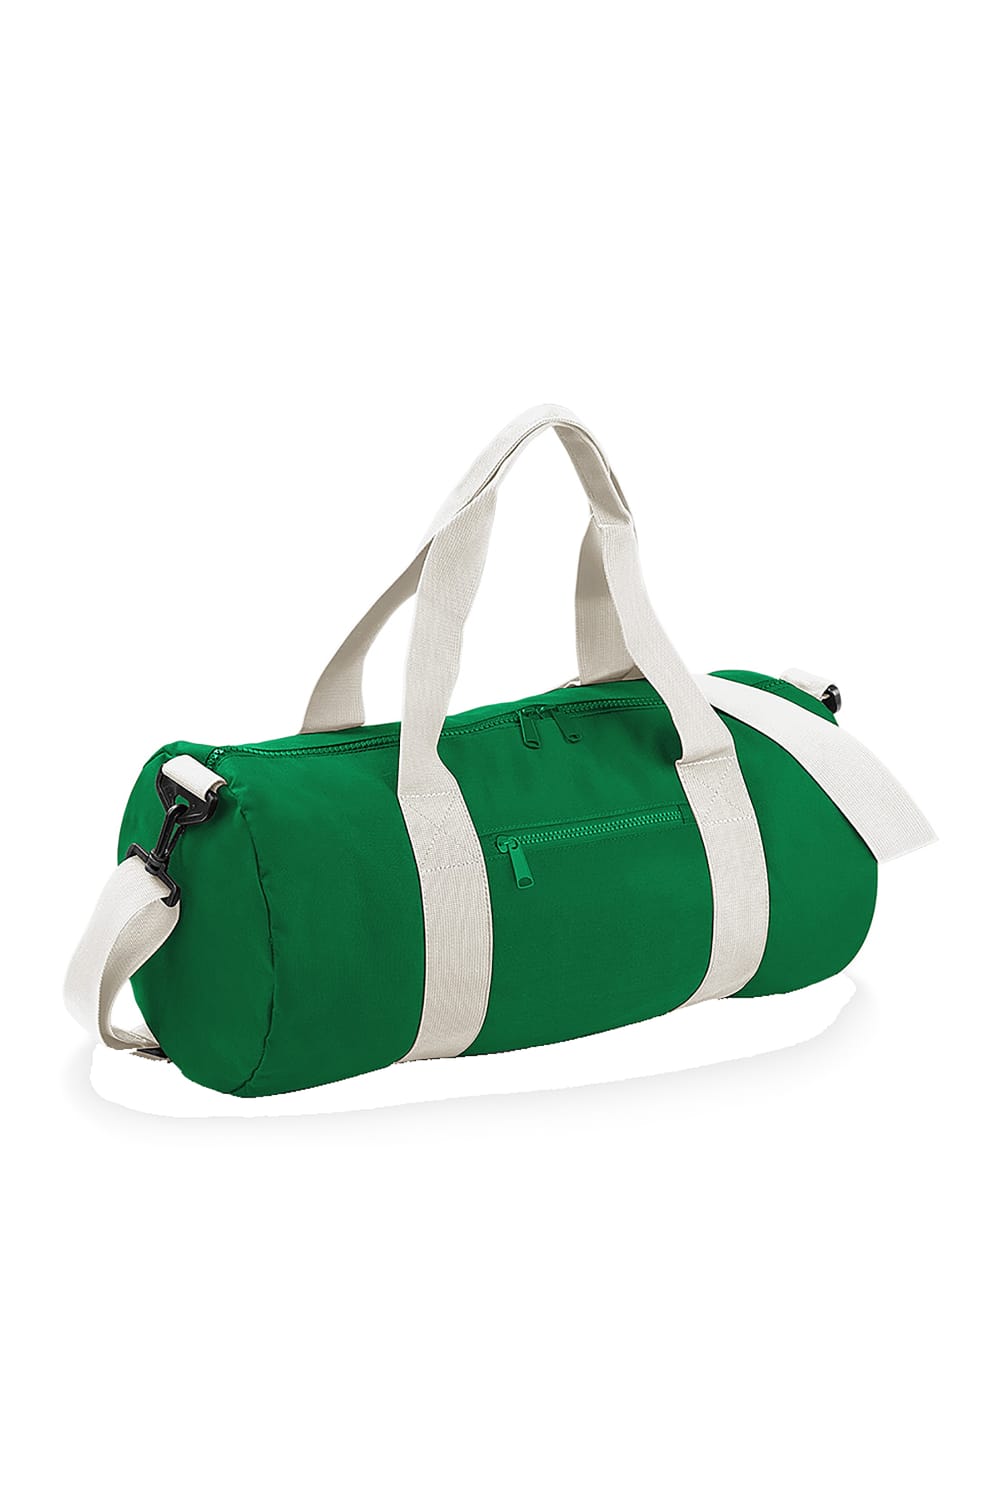 Bagbase Plain Varsity Barrel/Duffel Bag (5 Gallons) (Pack of 2) (Kelly Green/Off White) (One Size)